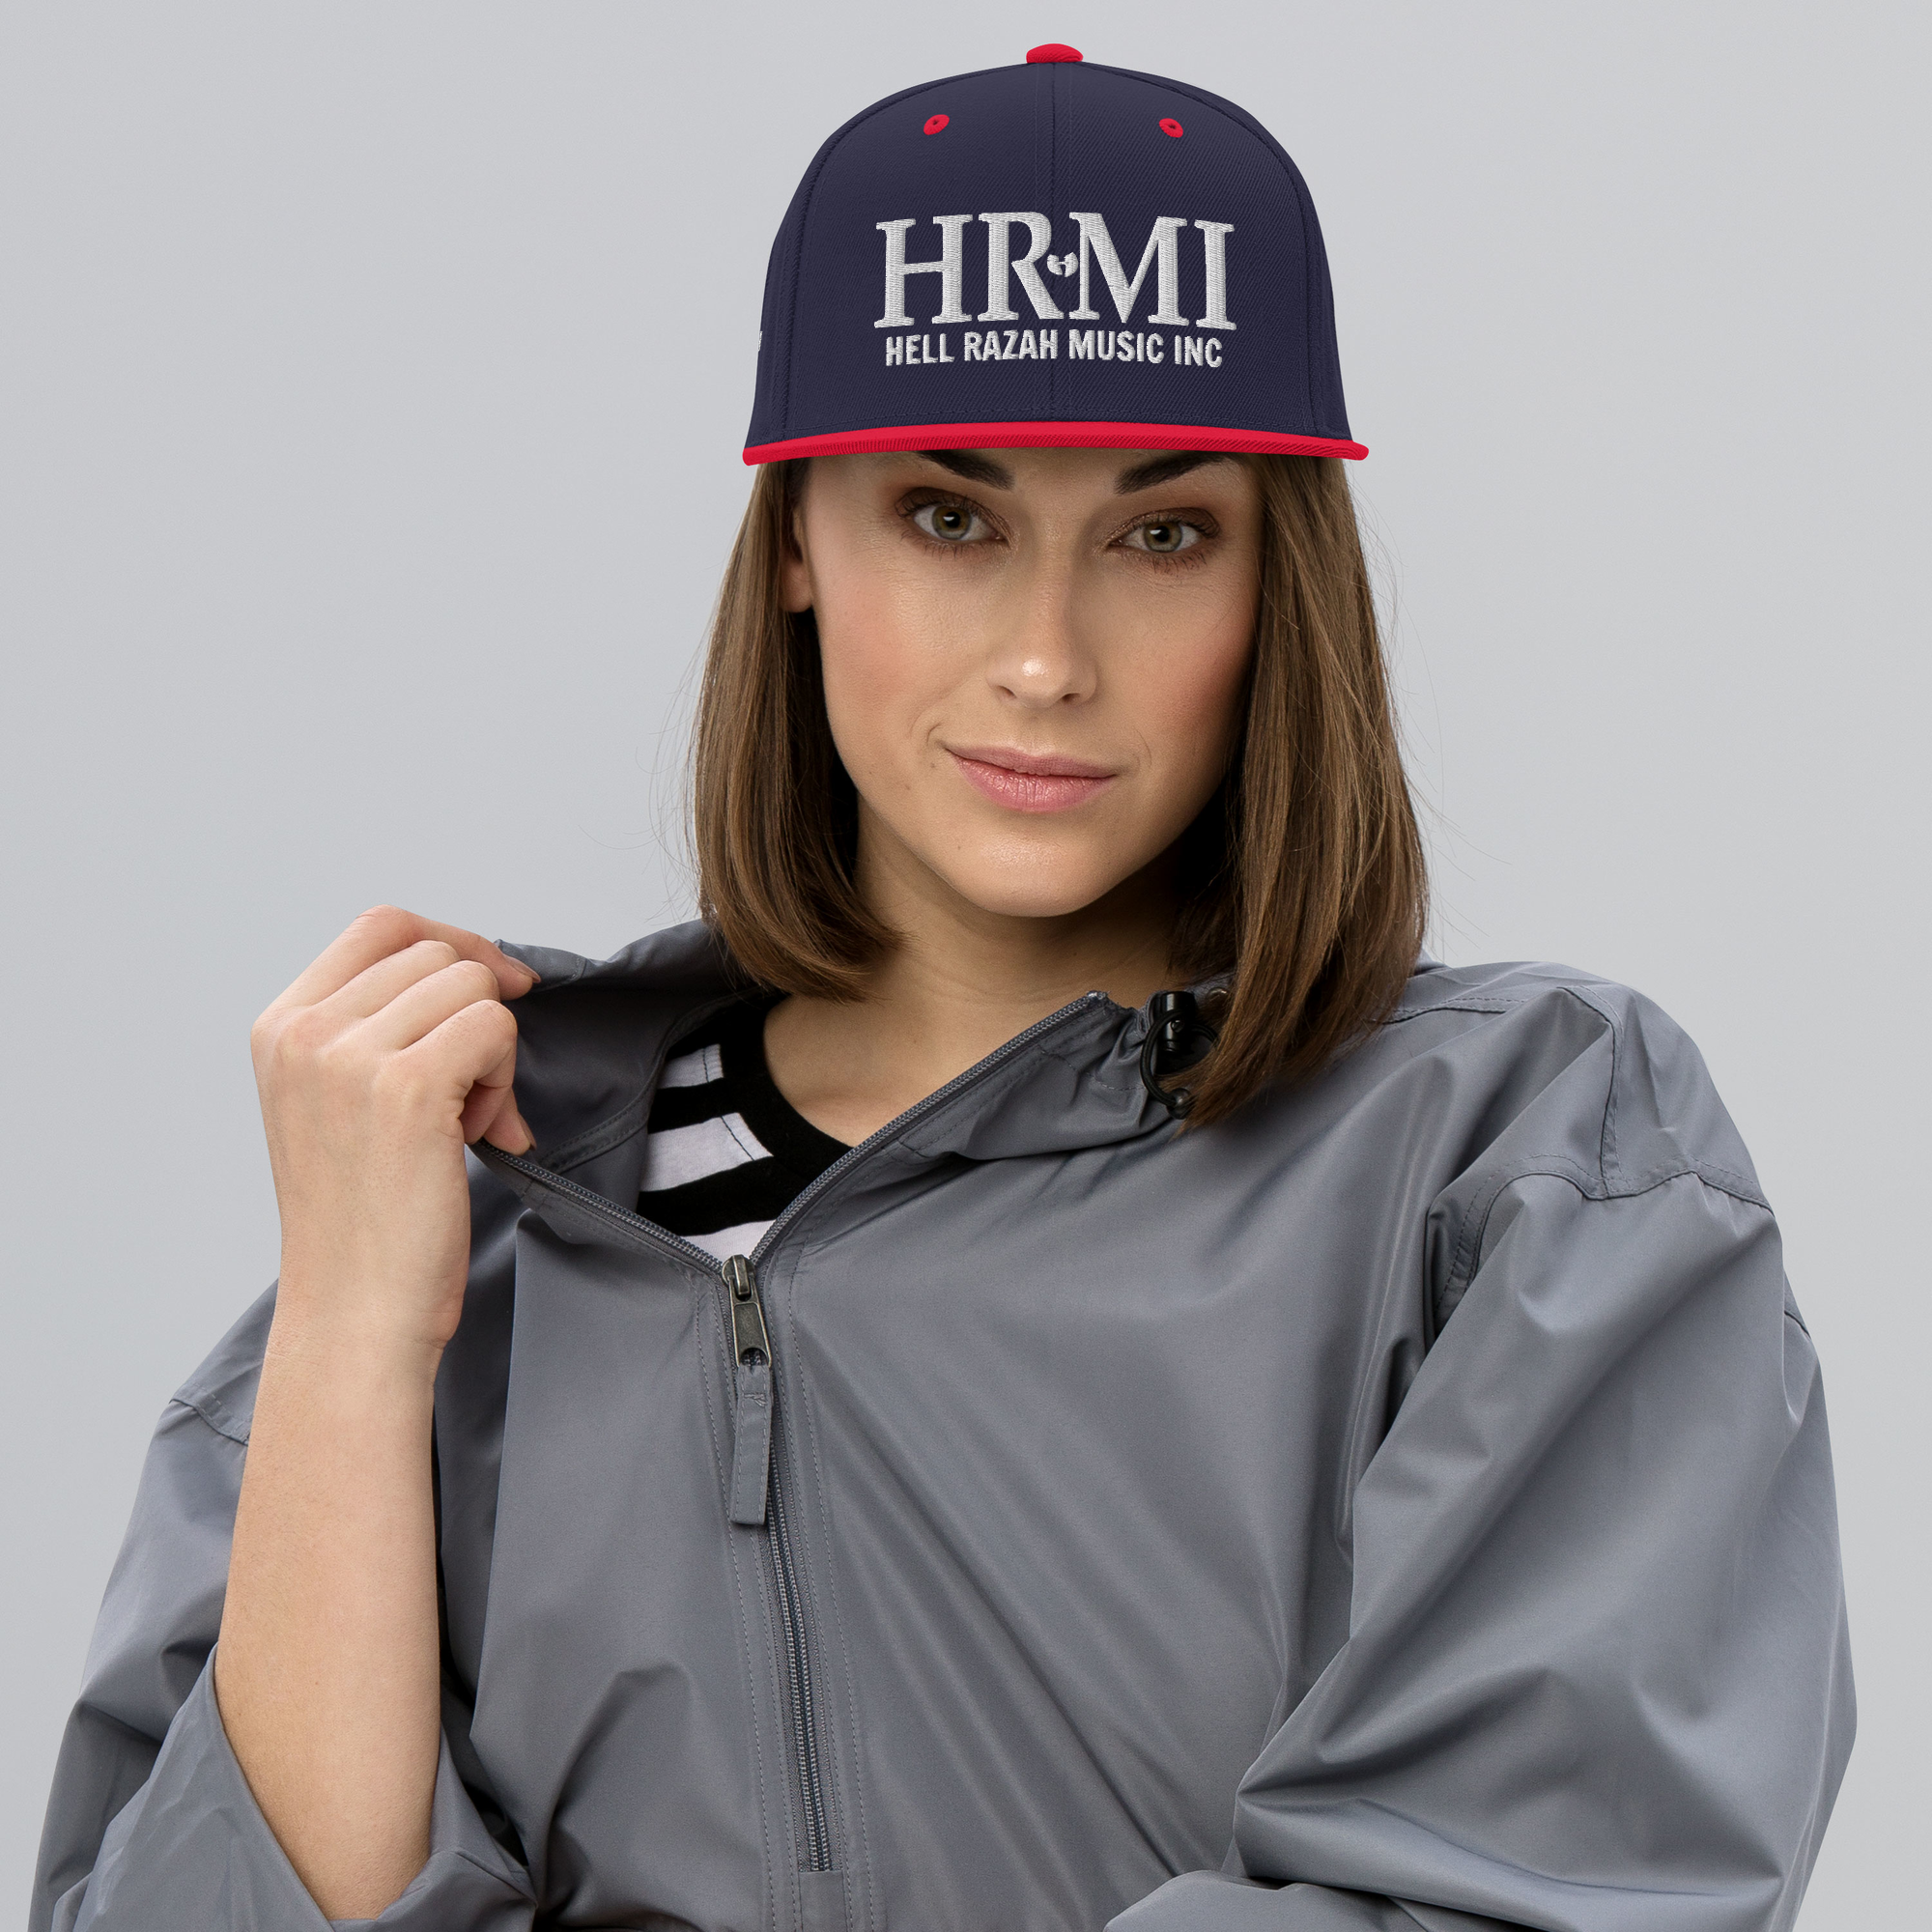 HRMI Embroidered Snapback Hat